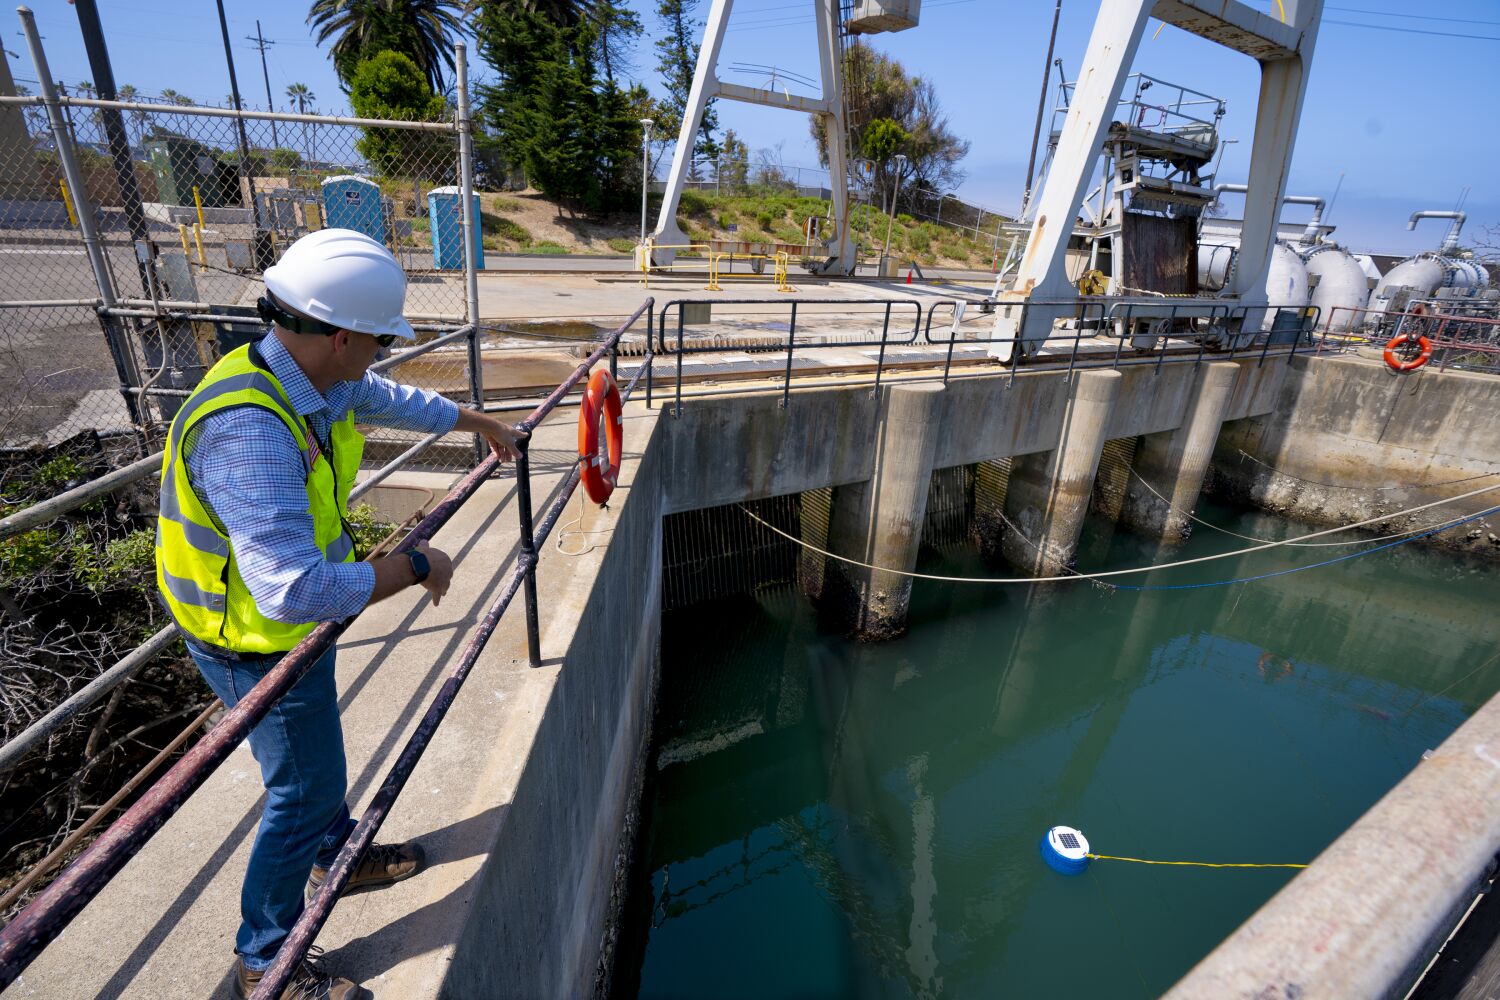 San Diegans poised to pay skyrocketing price for Poseidon's desalinated water